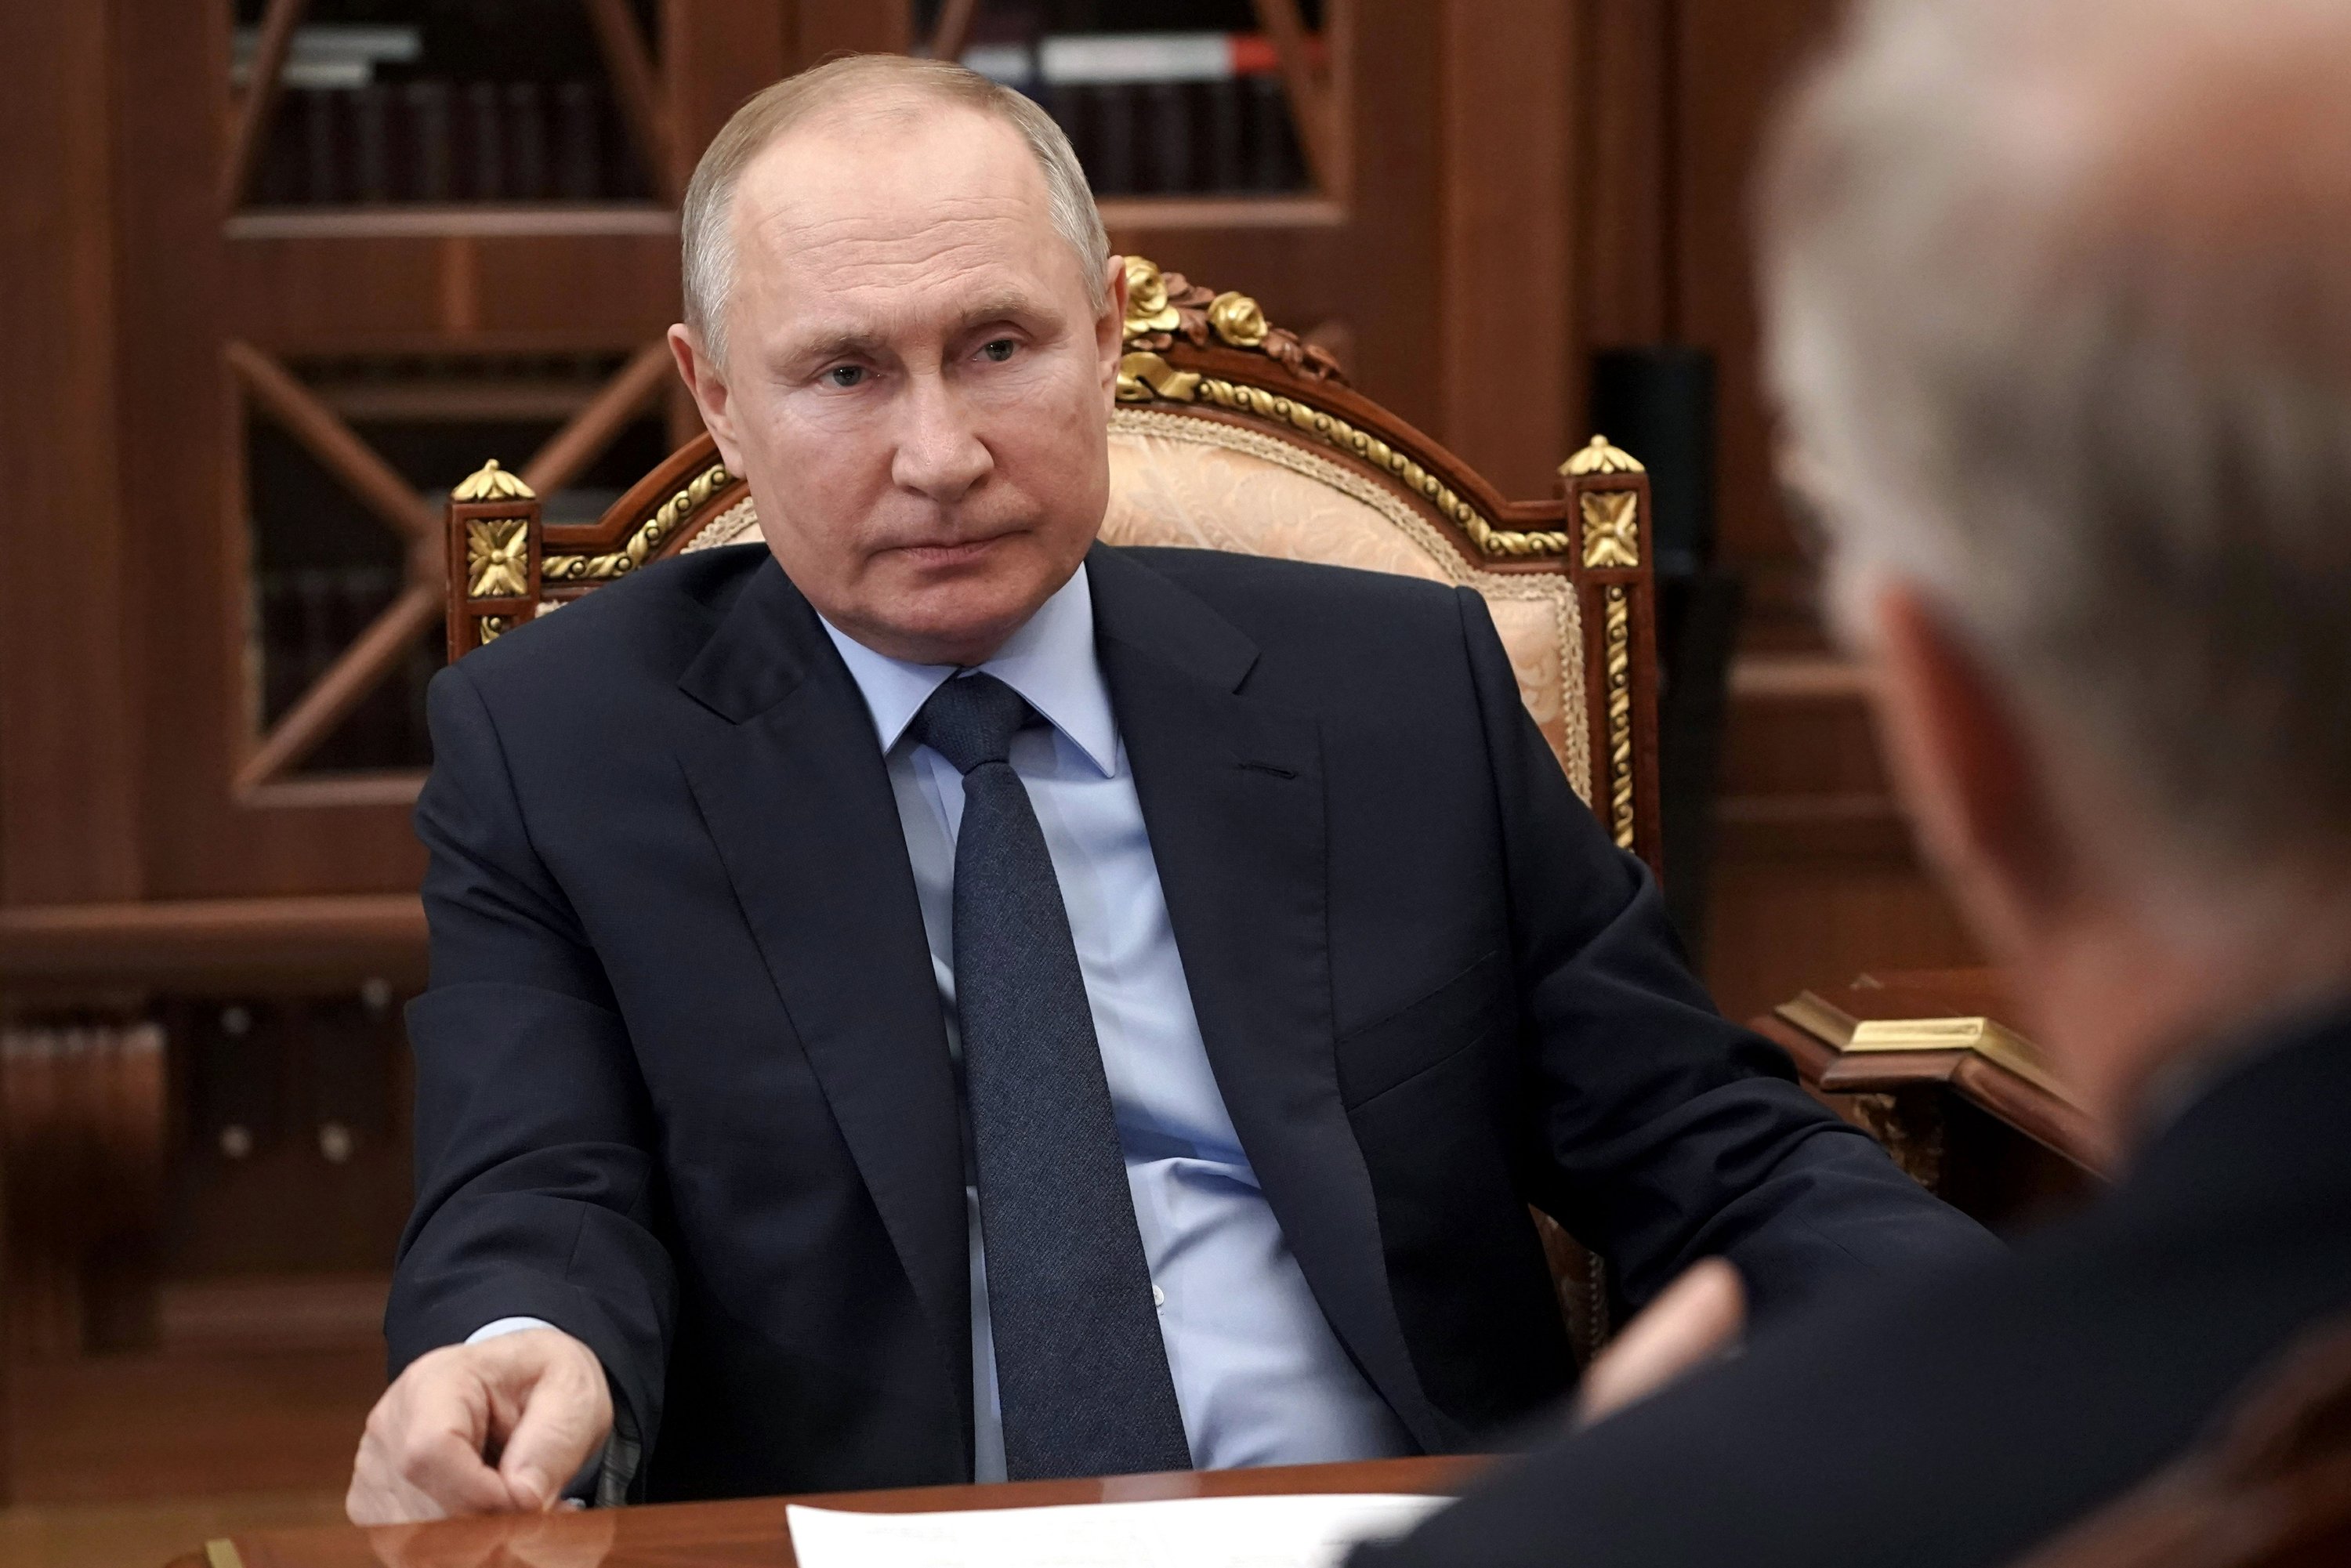 Putin signs the law that allows him two more terms as Russia’s leader